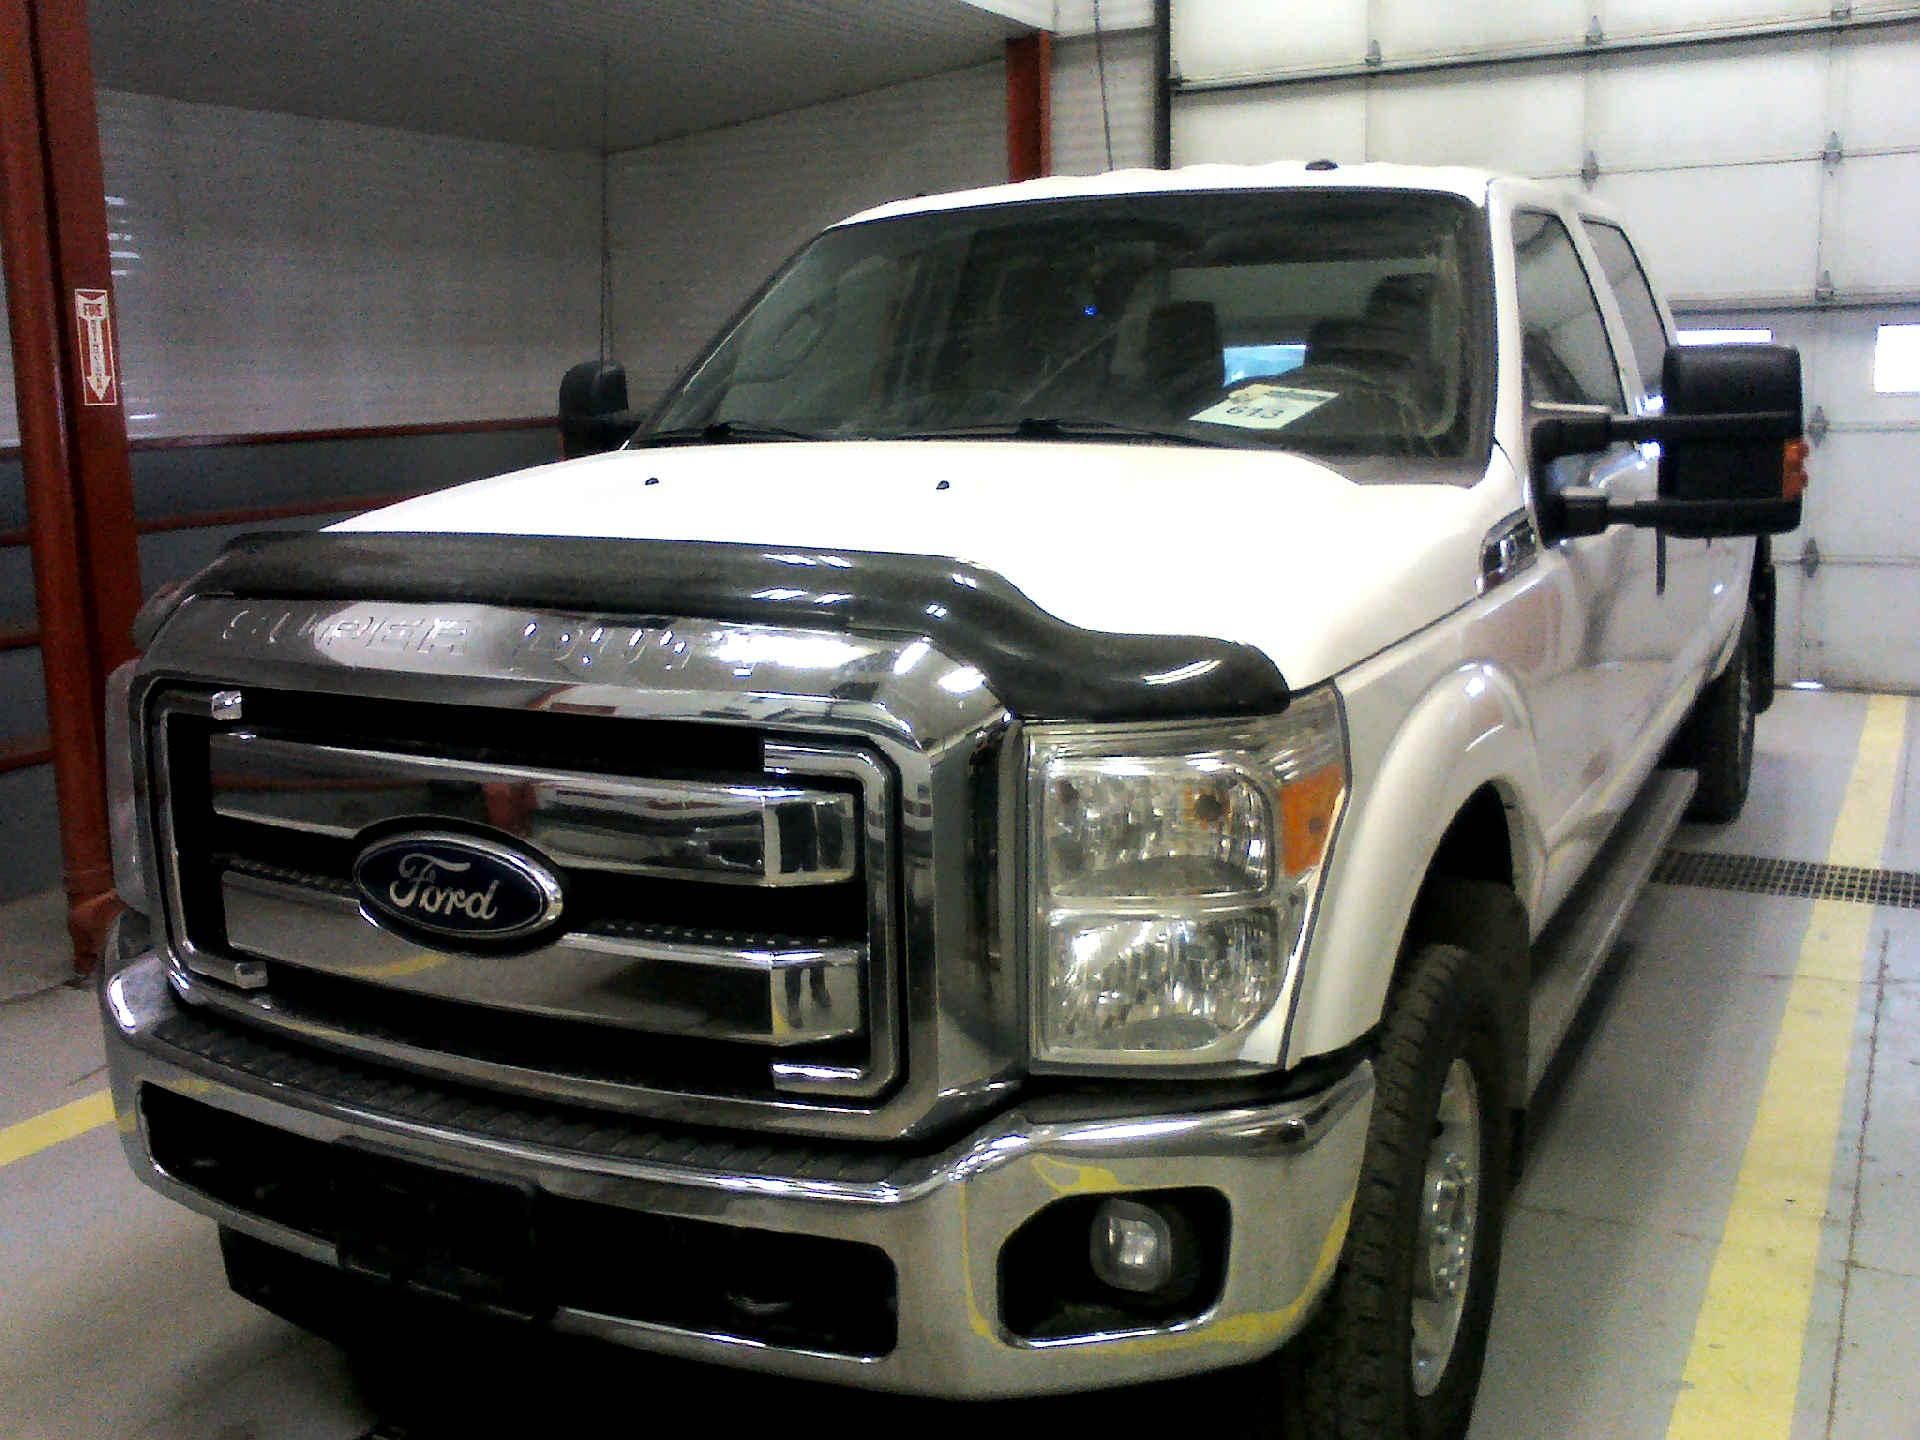 2012 FORD F-350 SD XLT CREW CAB 4WD 6.2L V8 OHV 16V AUTOMATIC SN:1FT8W3B66CEA26937 OPTIONS:AC TW